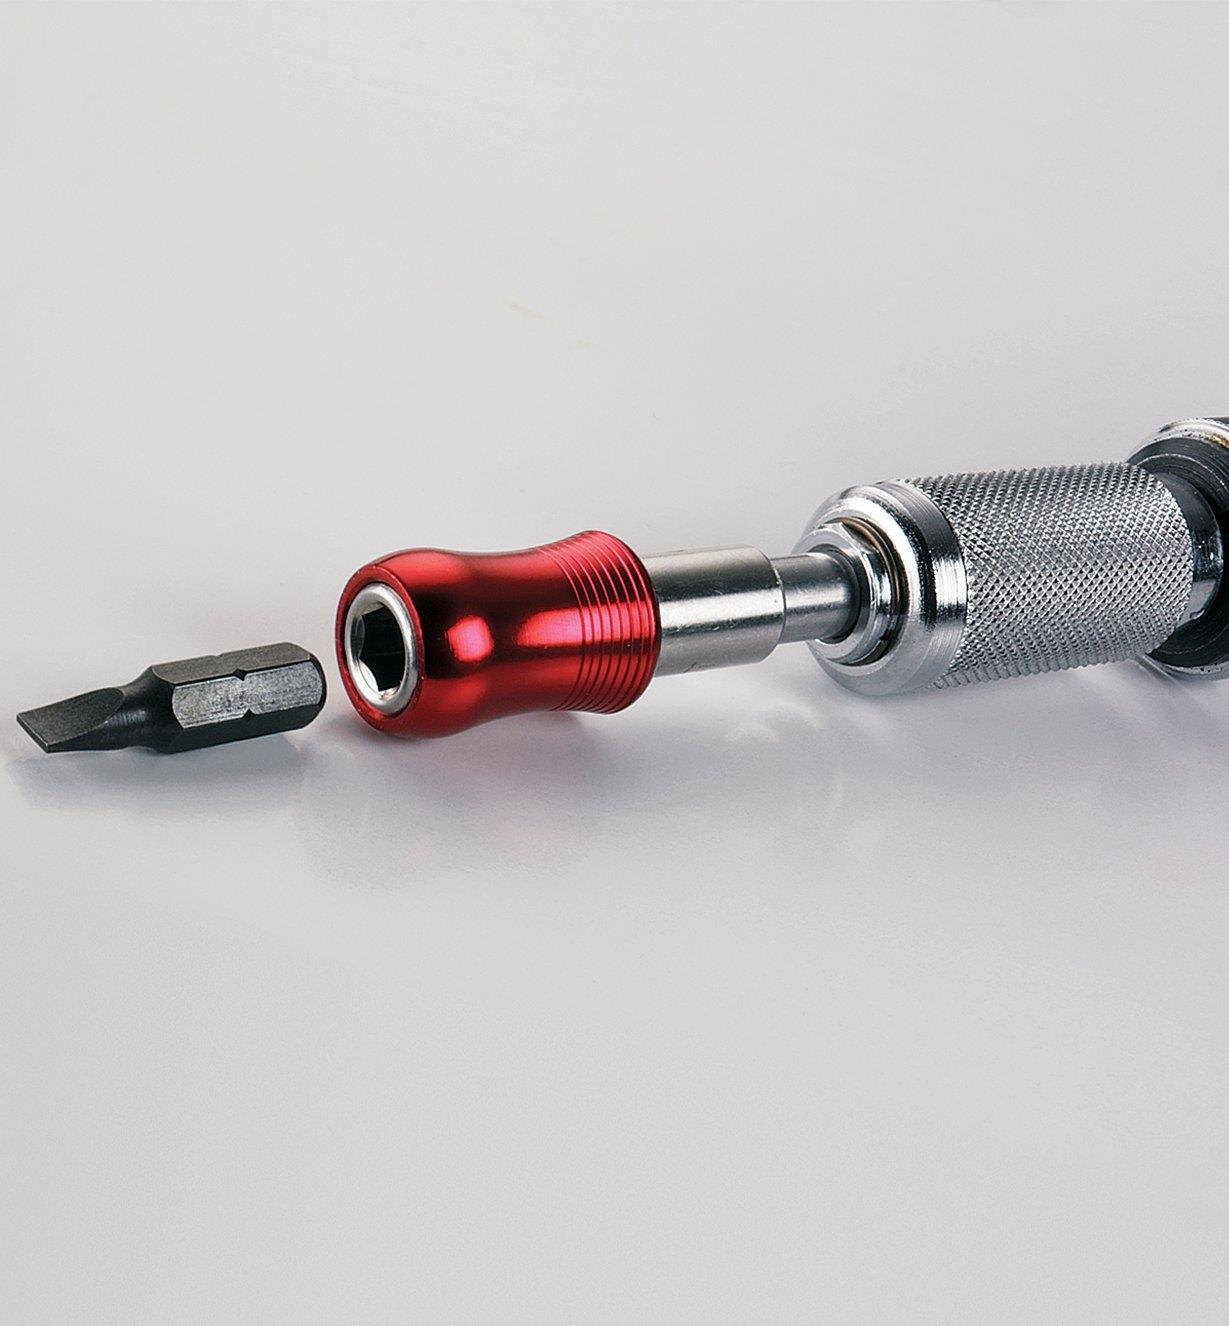 Hex Adapter attached to a screwdriver